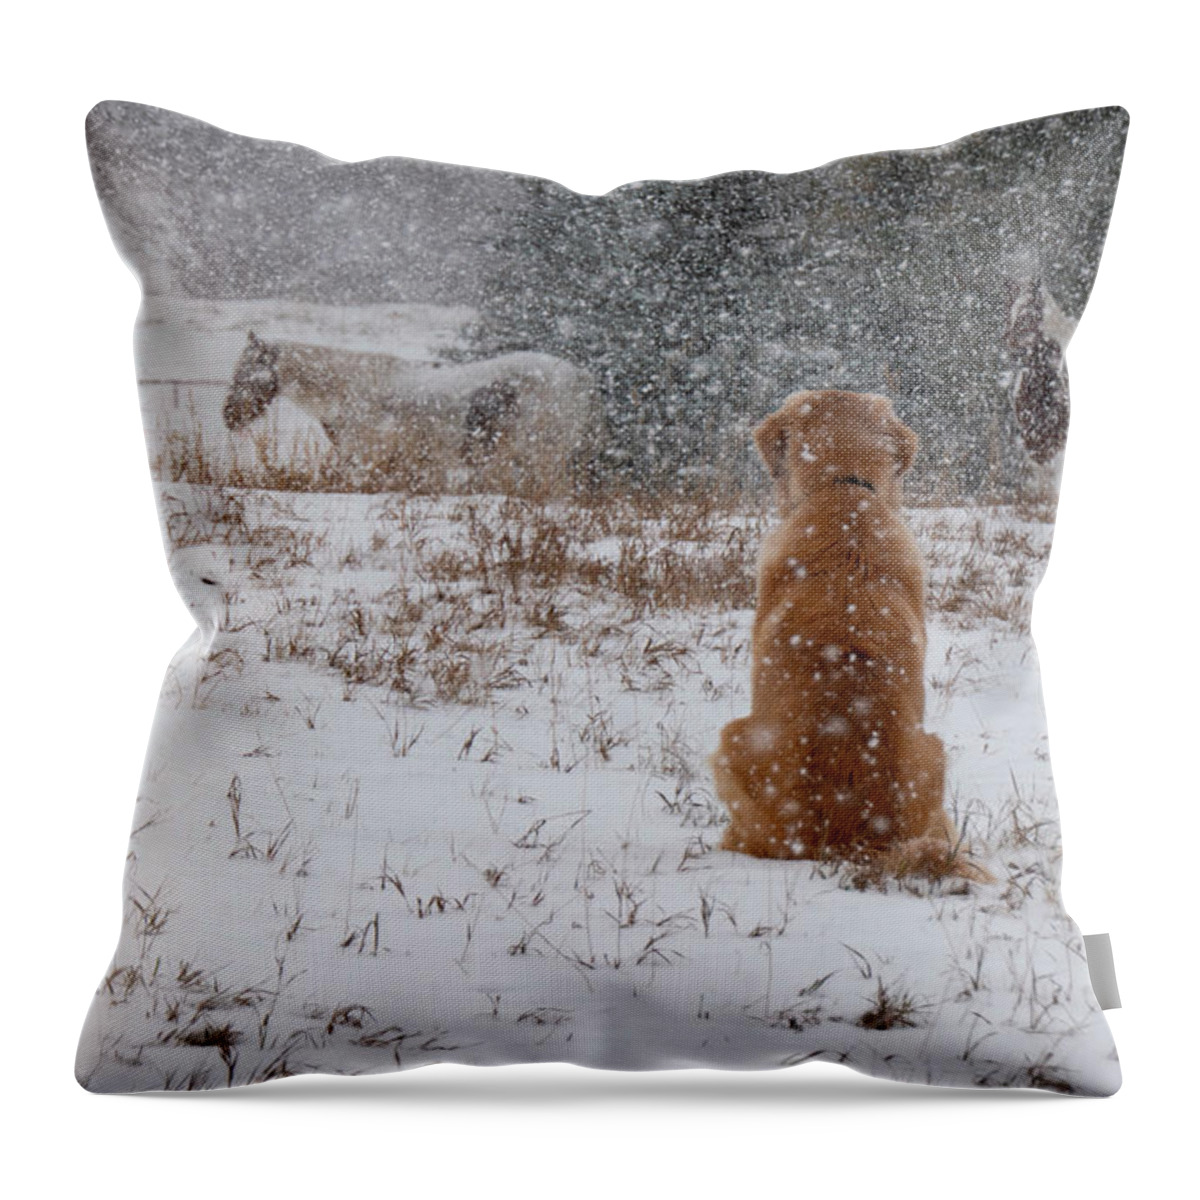 Snow Throw Pillow featuring the photograph Dog And Horses In The Snow by Karen Rispin